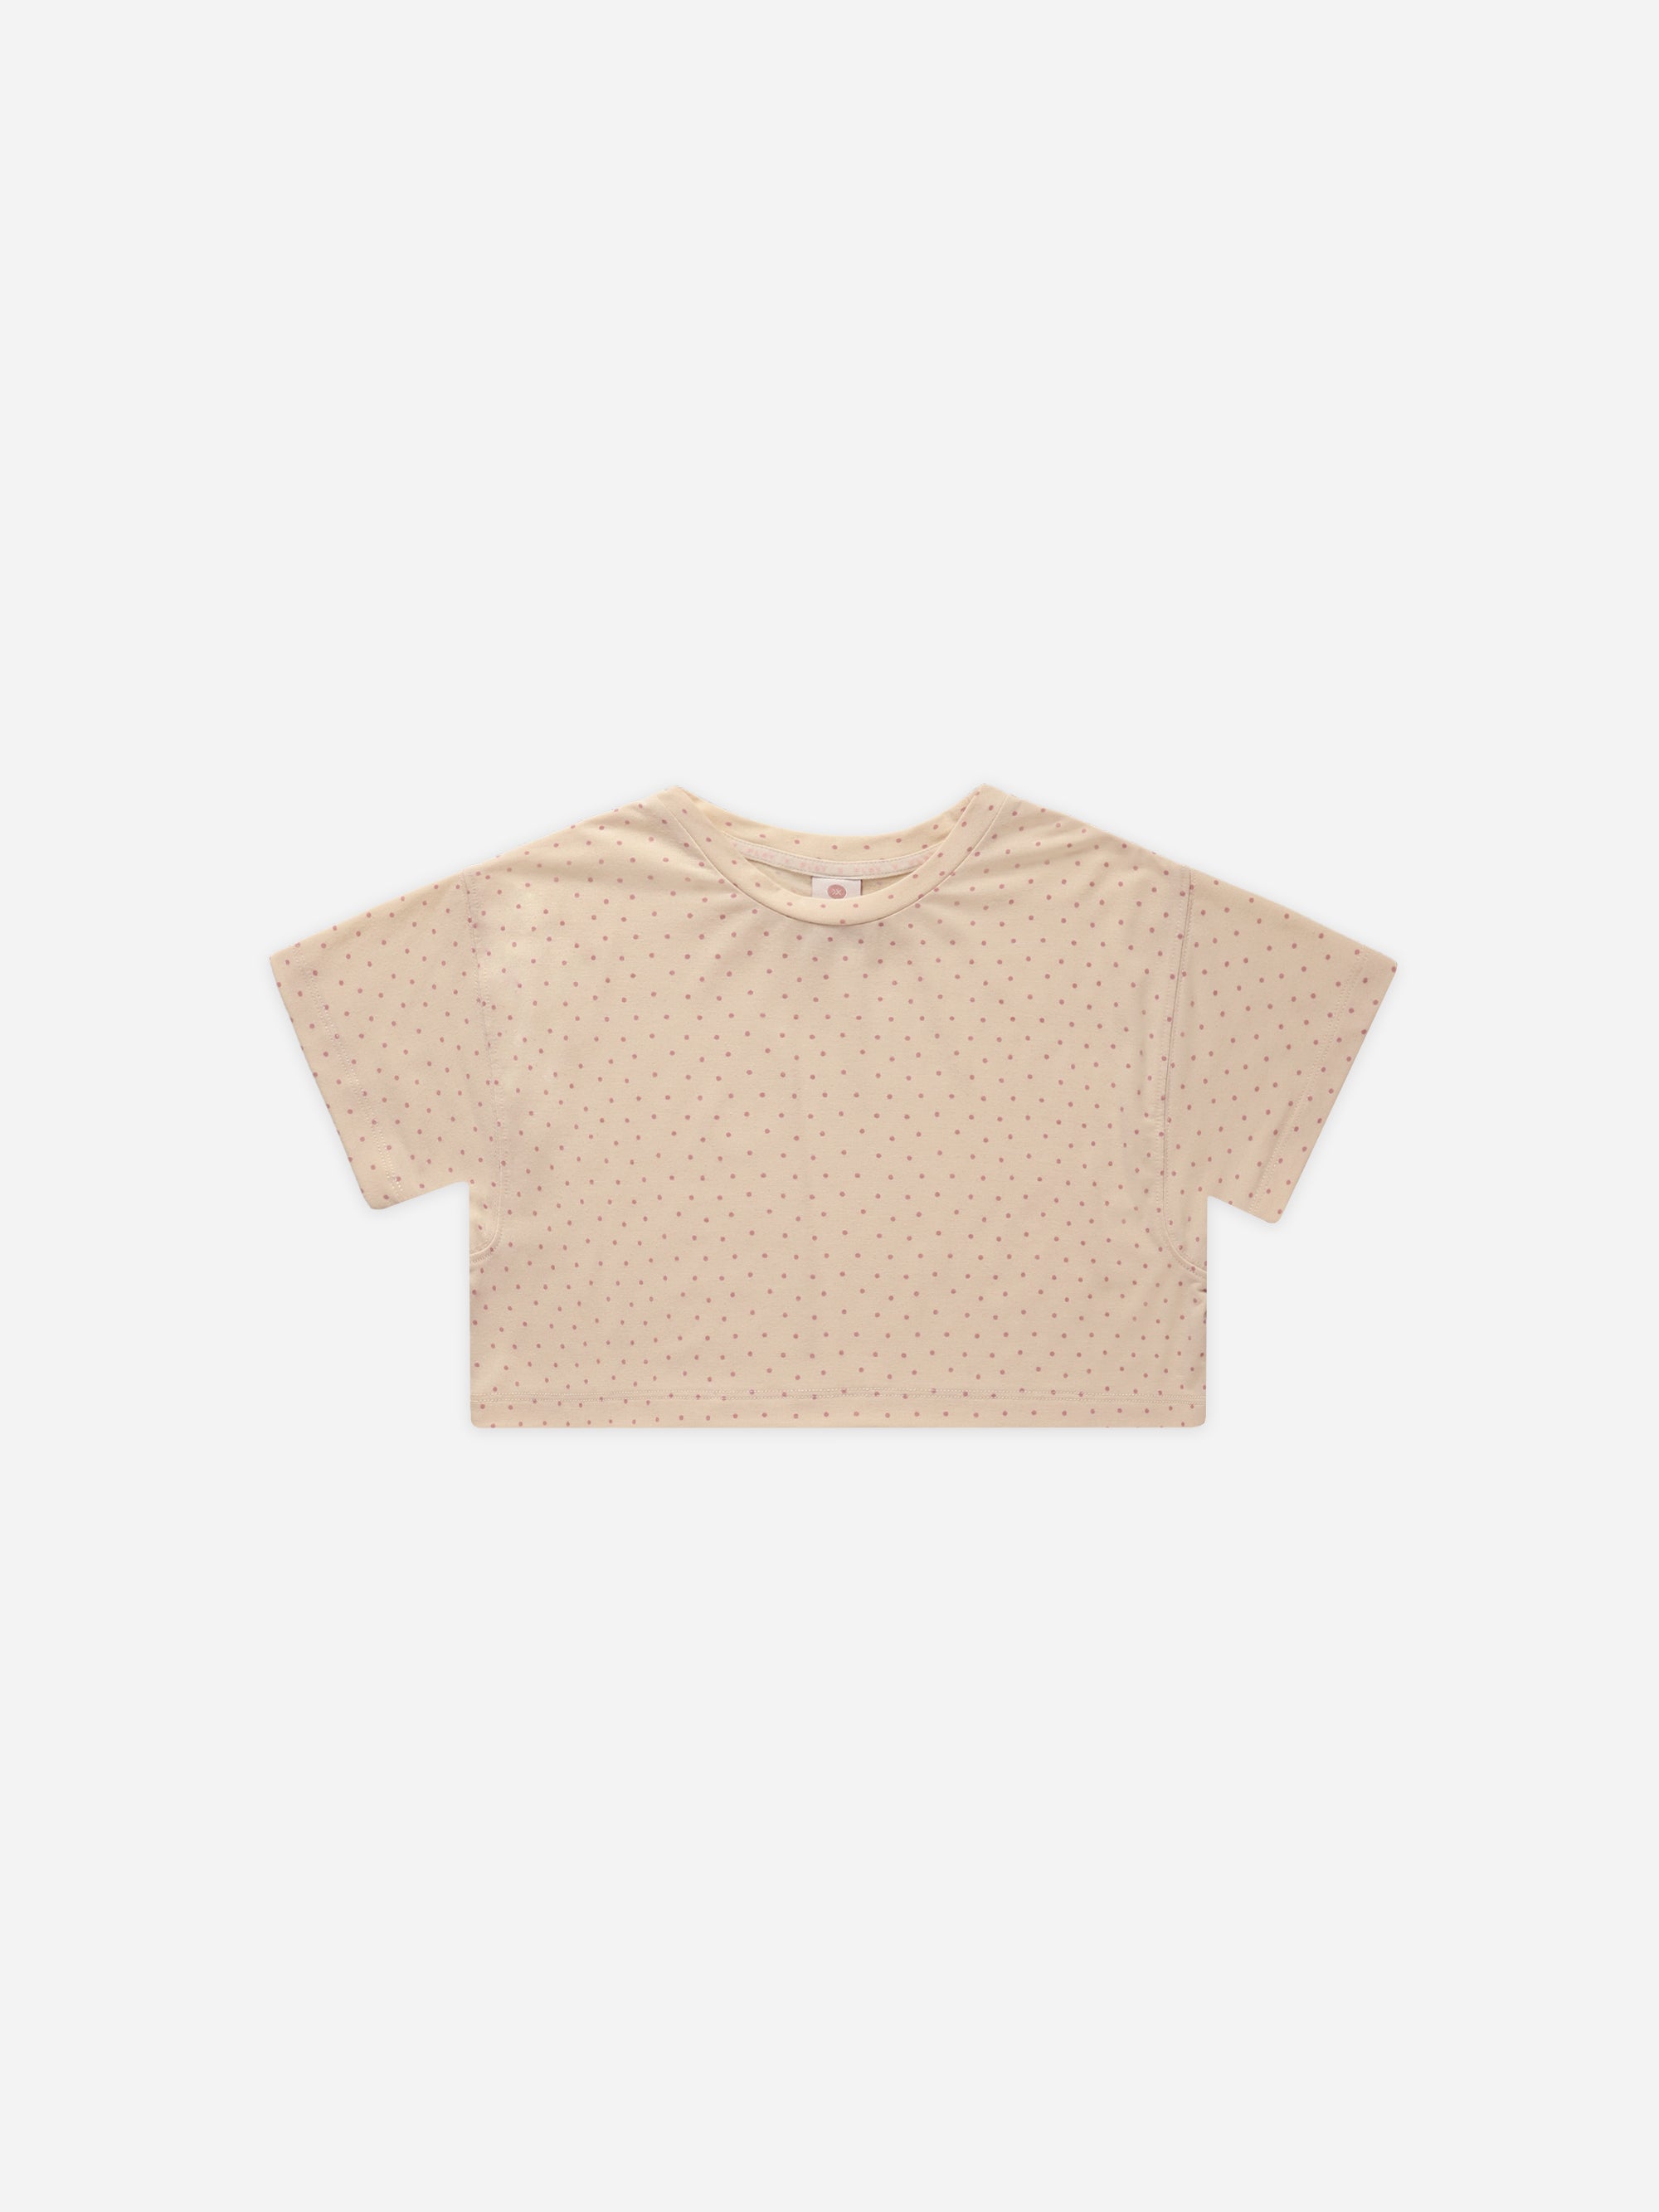 Tech Crop Tee || Polka Dot - Rylee + Cru | Kids Clothes | Trendy Baby Clothes | Modern Infant Outfits |